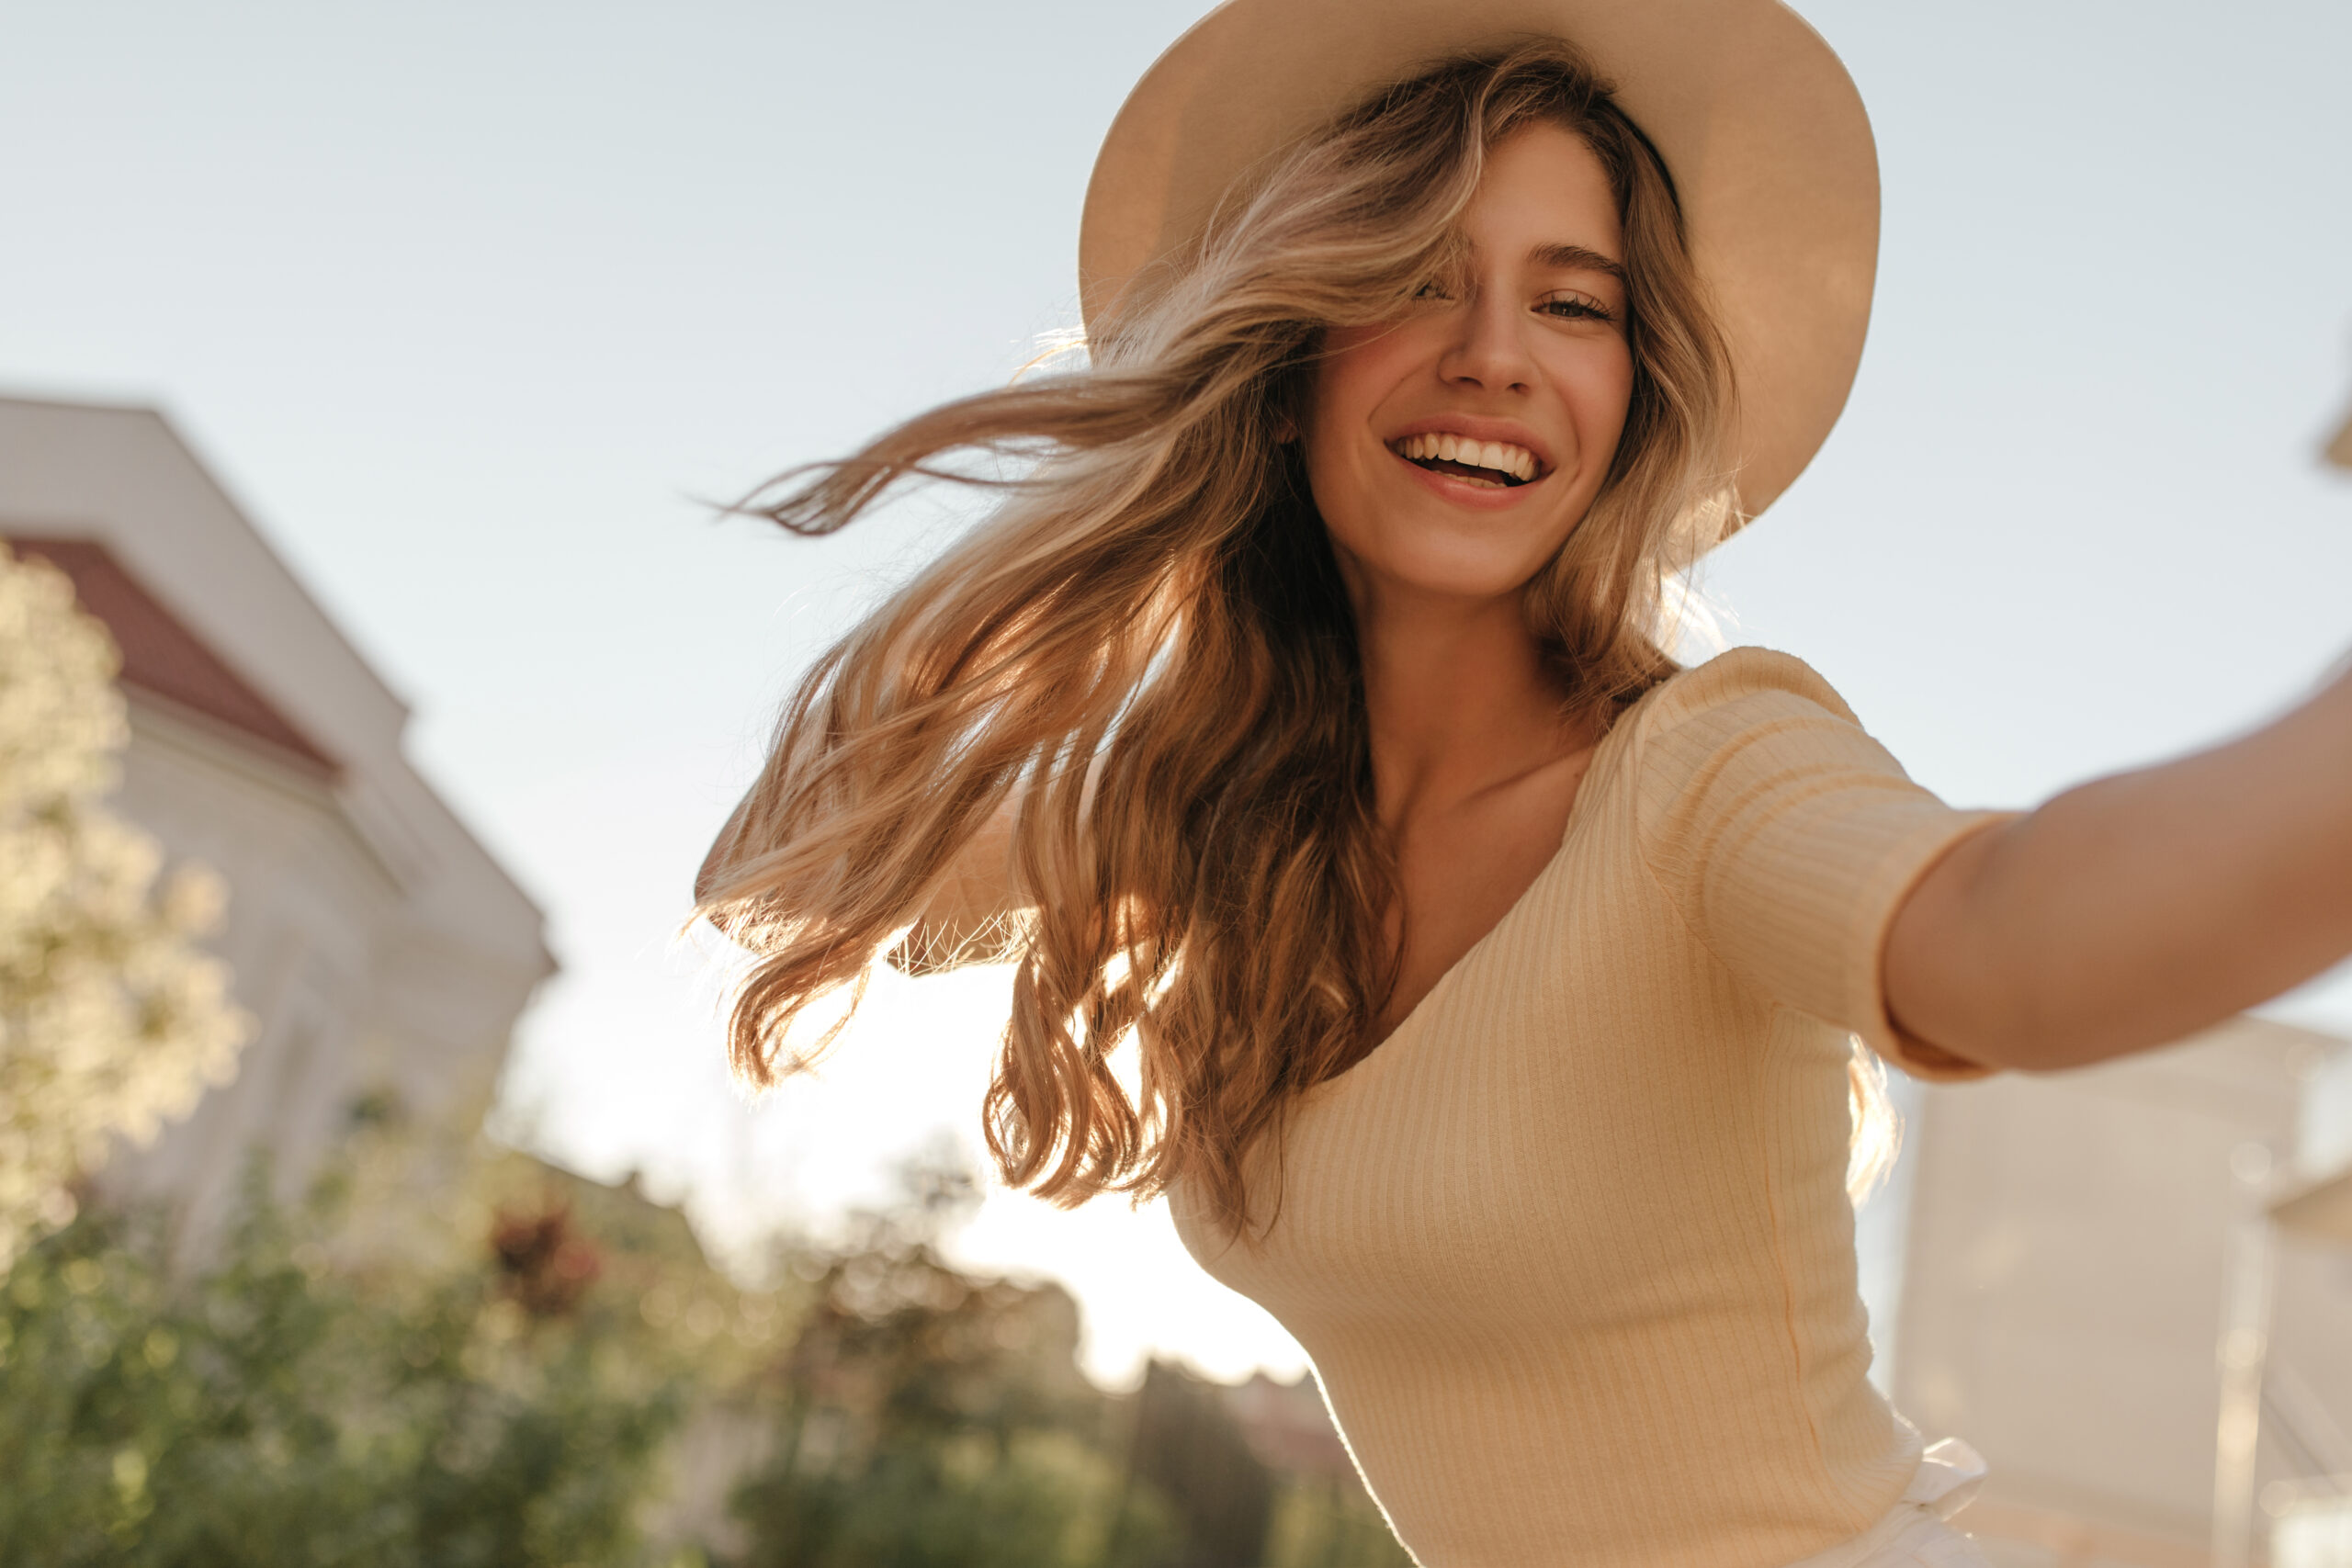 Happy young woman holding camera in hand close-up. Her hair is flying in wind, she is wearing hat. Outdoor photo.